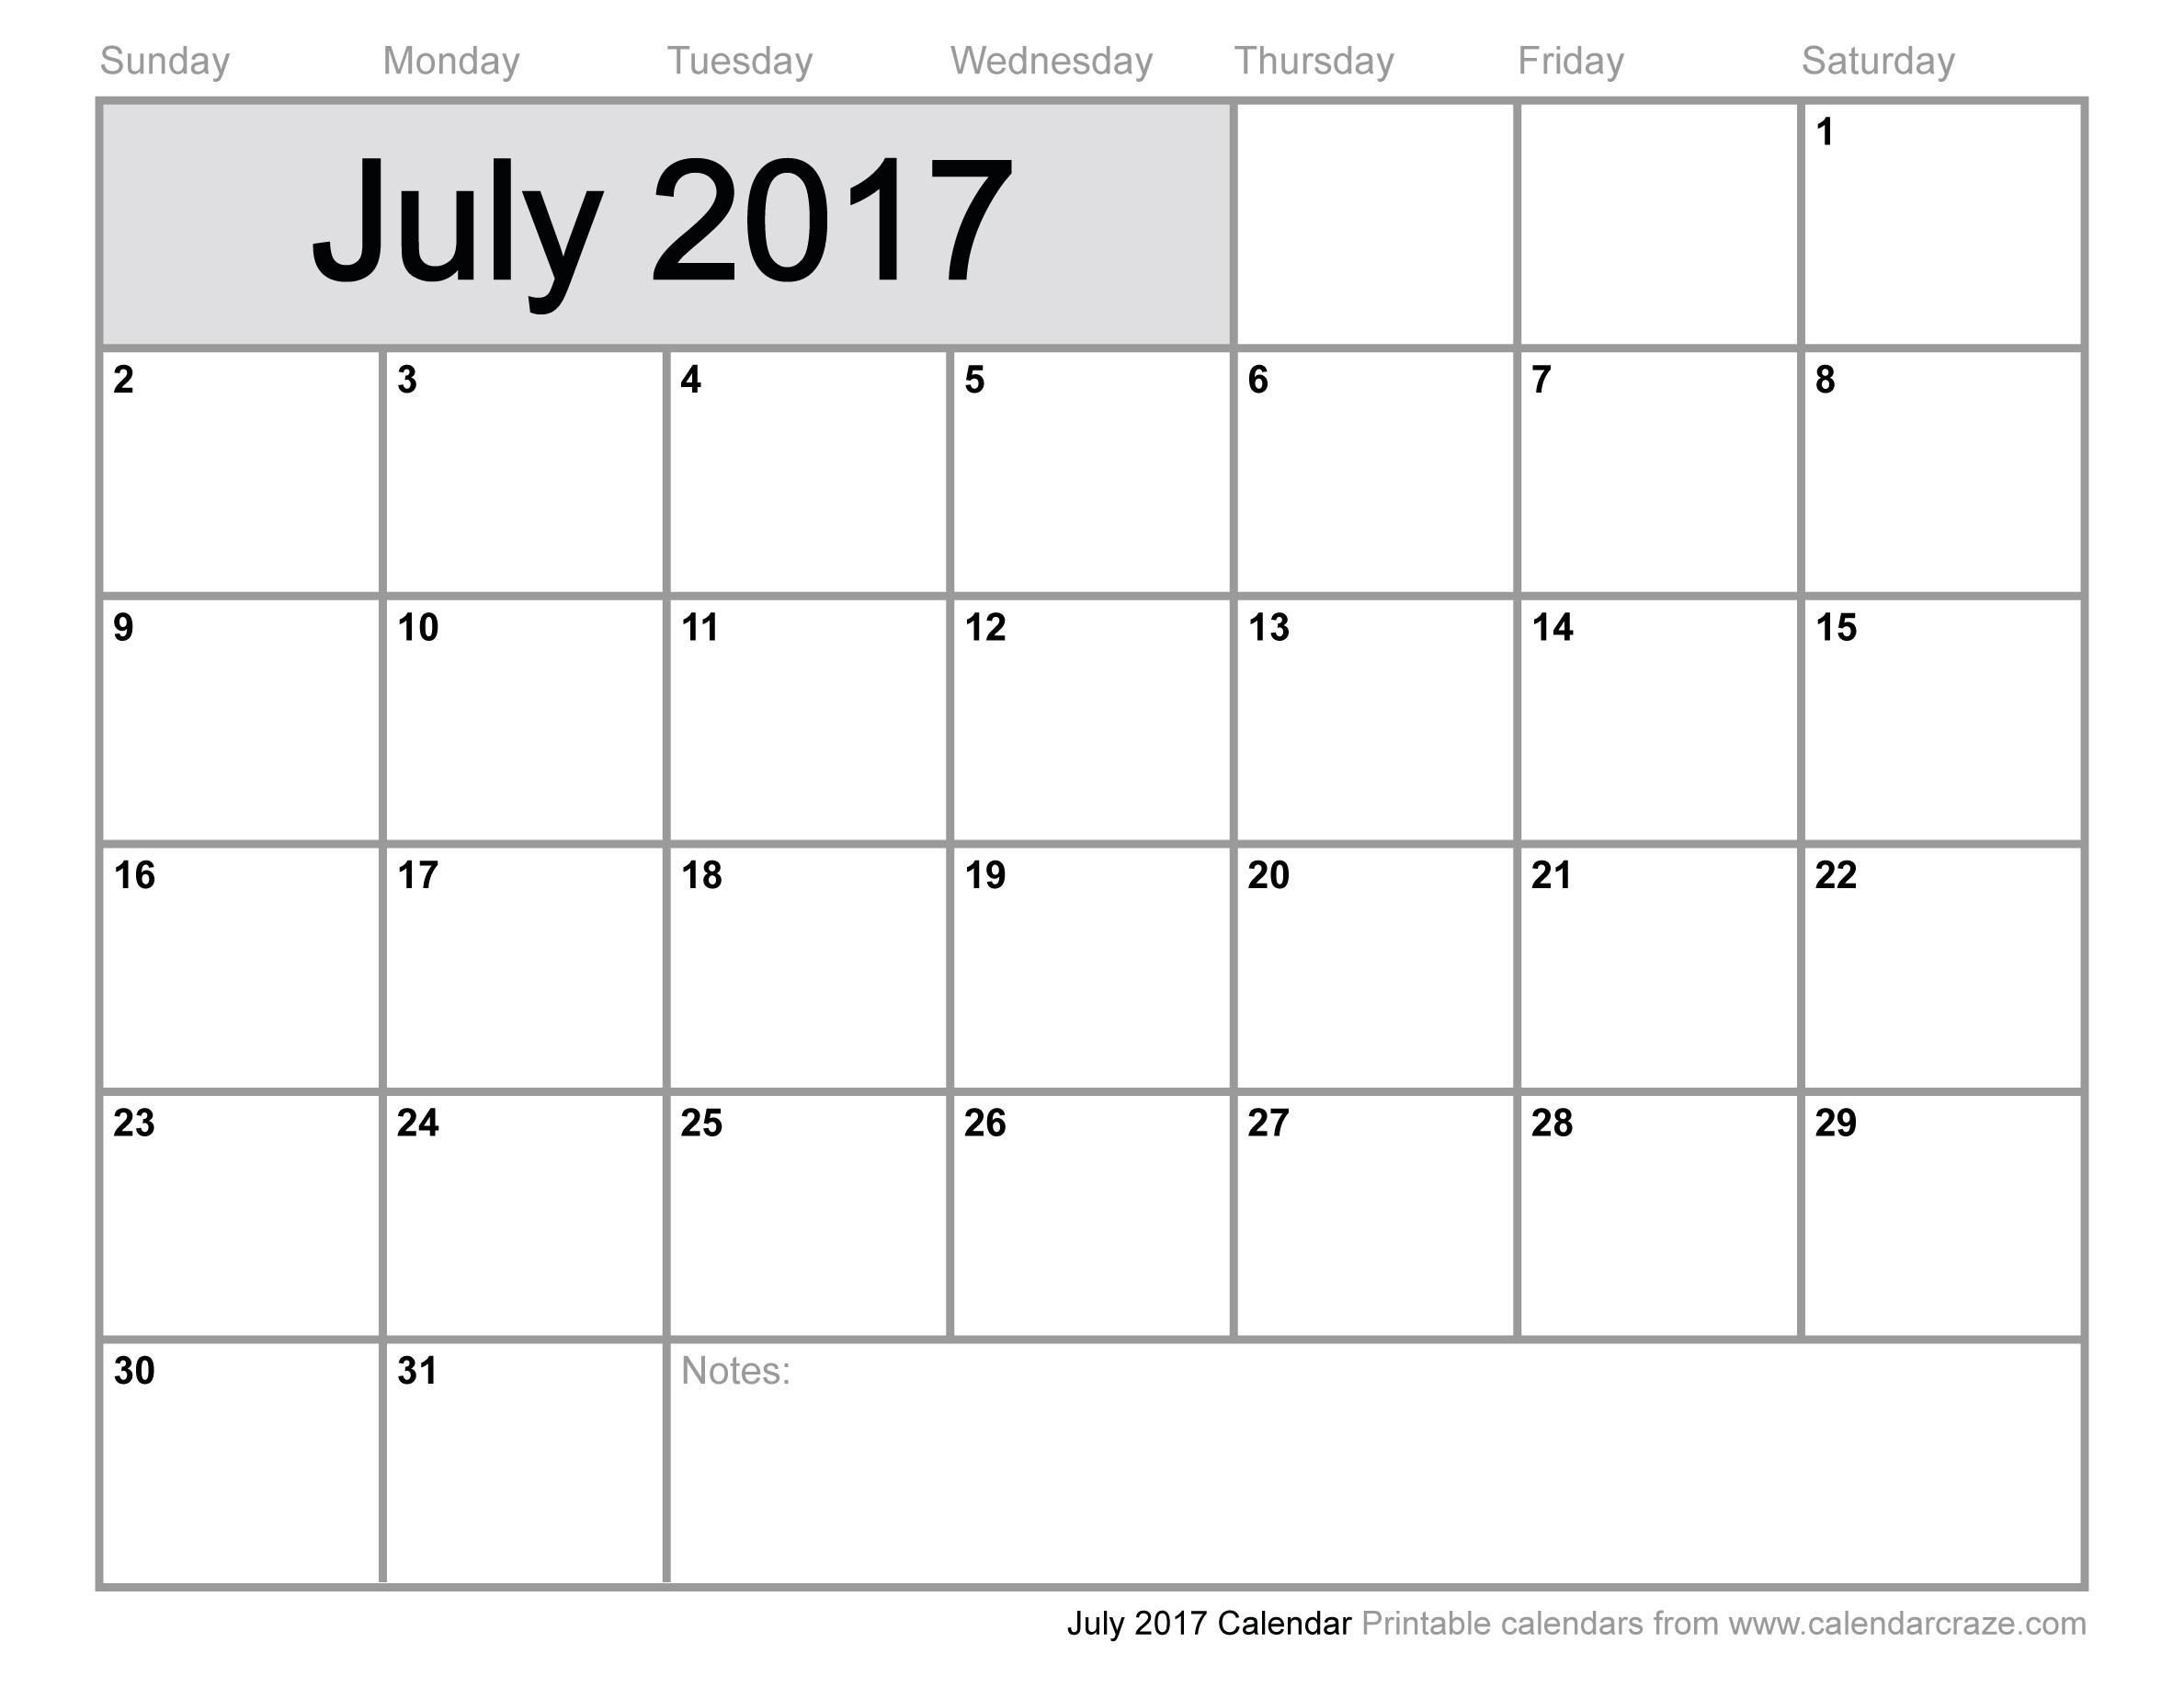 July 2017 Calendar With US Holidays